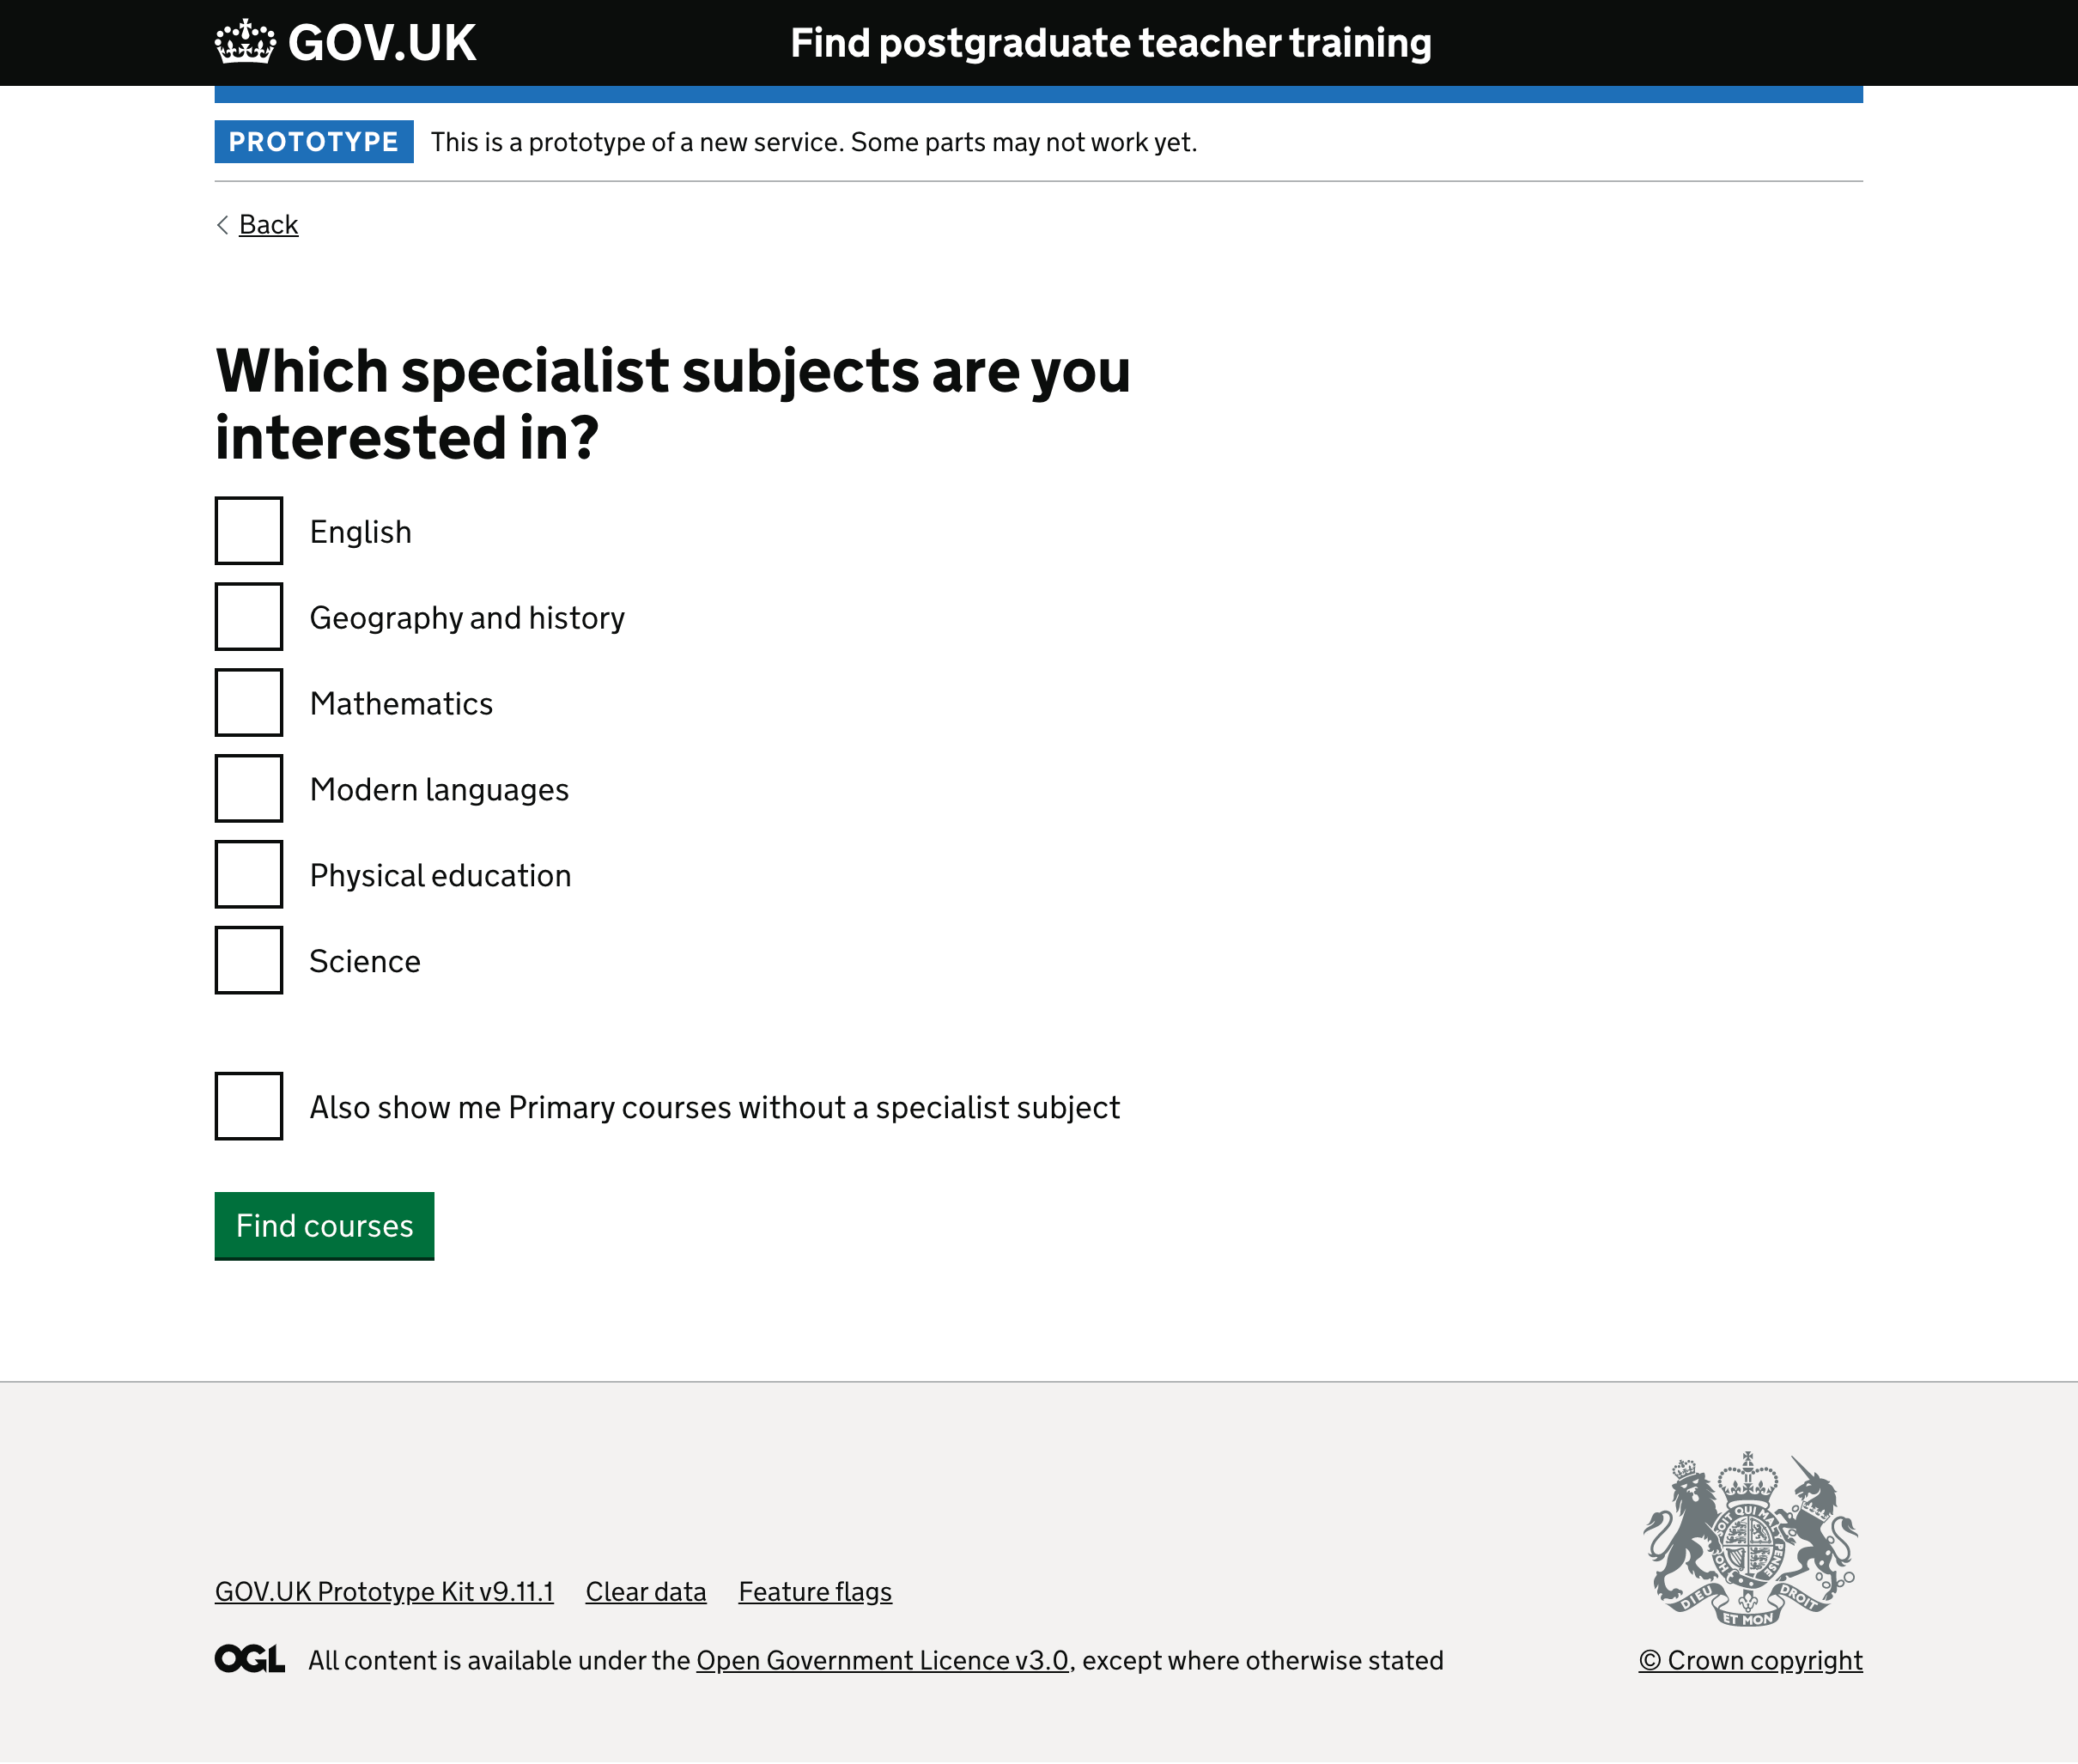 Screenshot of the new page asking users what specialist subjects they are interested in